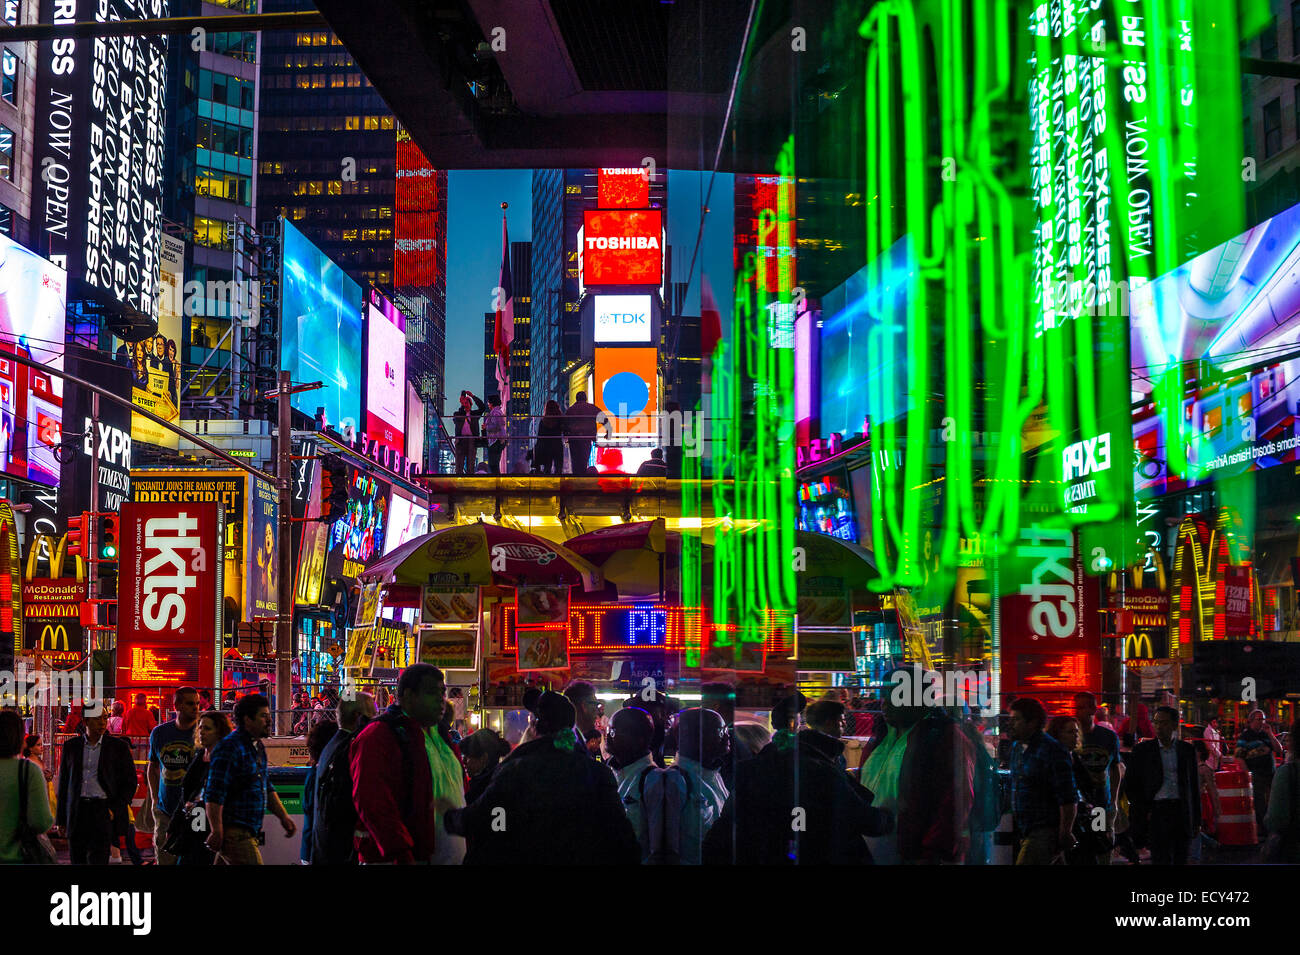 Times Square, Manhattan, New York City, New York, United States Banque D'Images